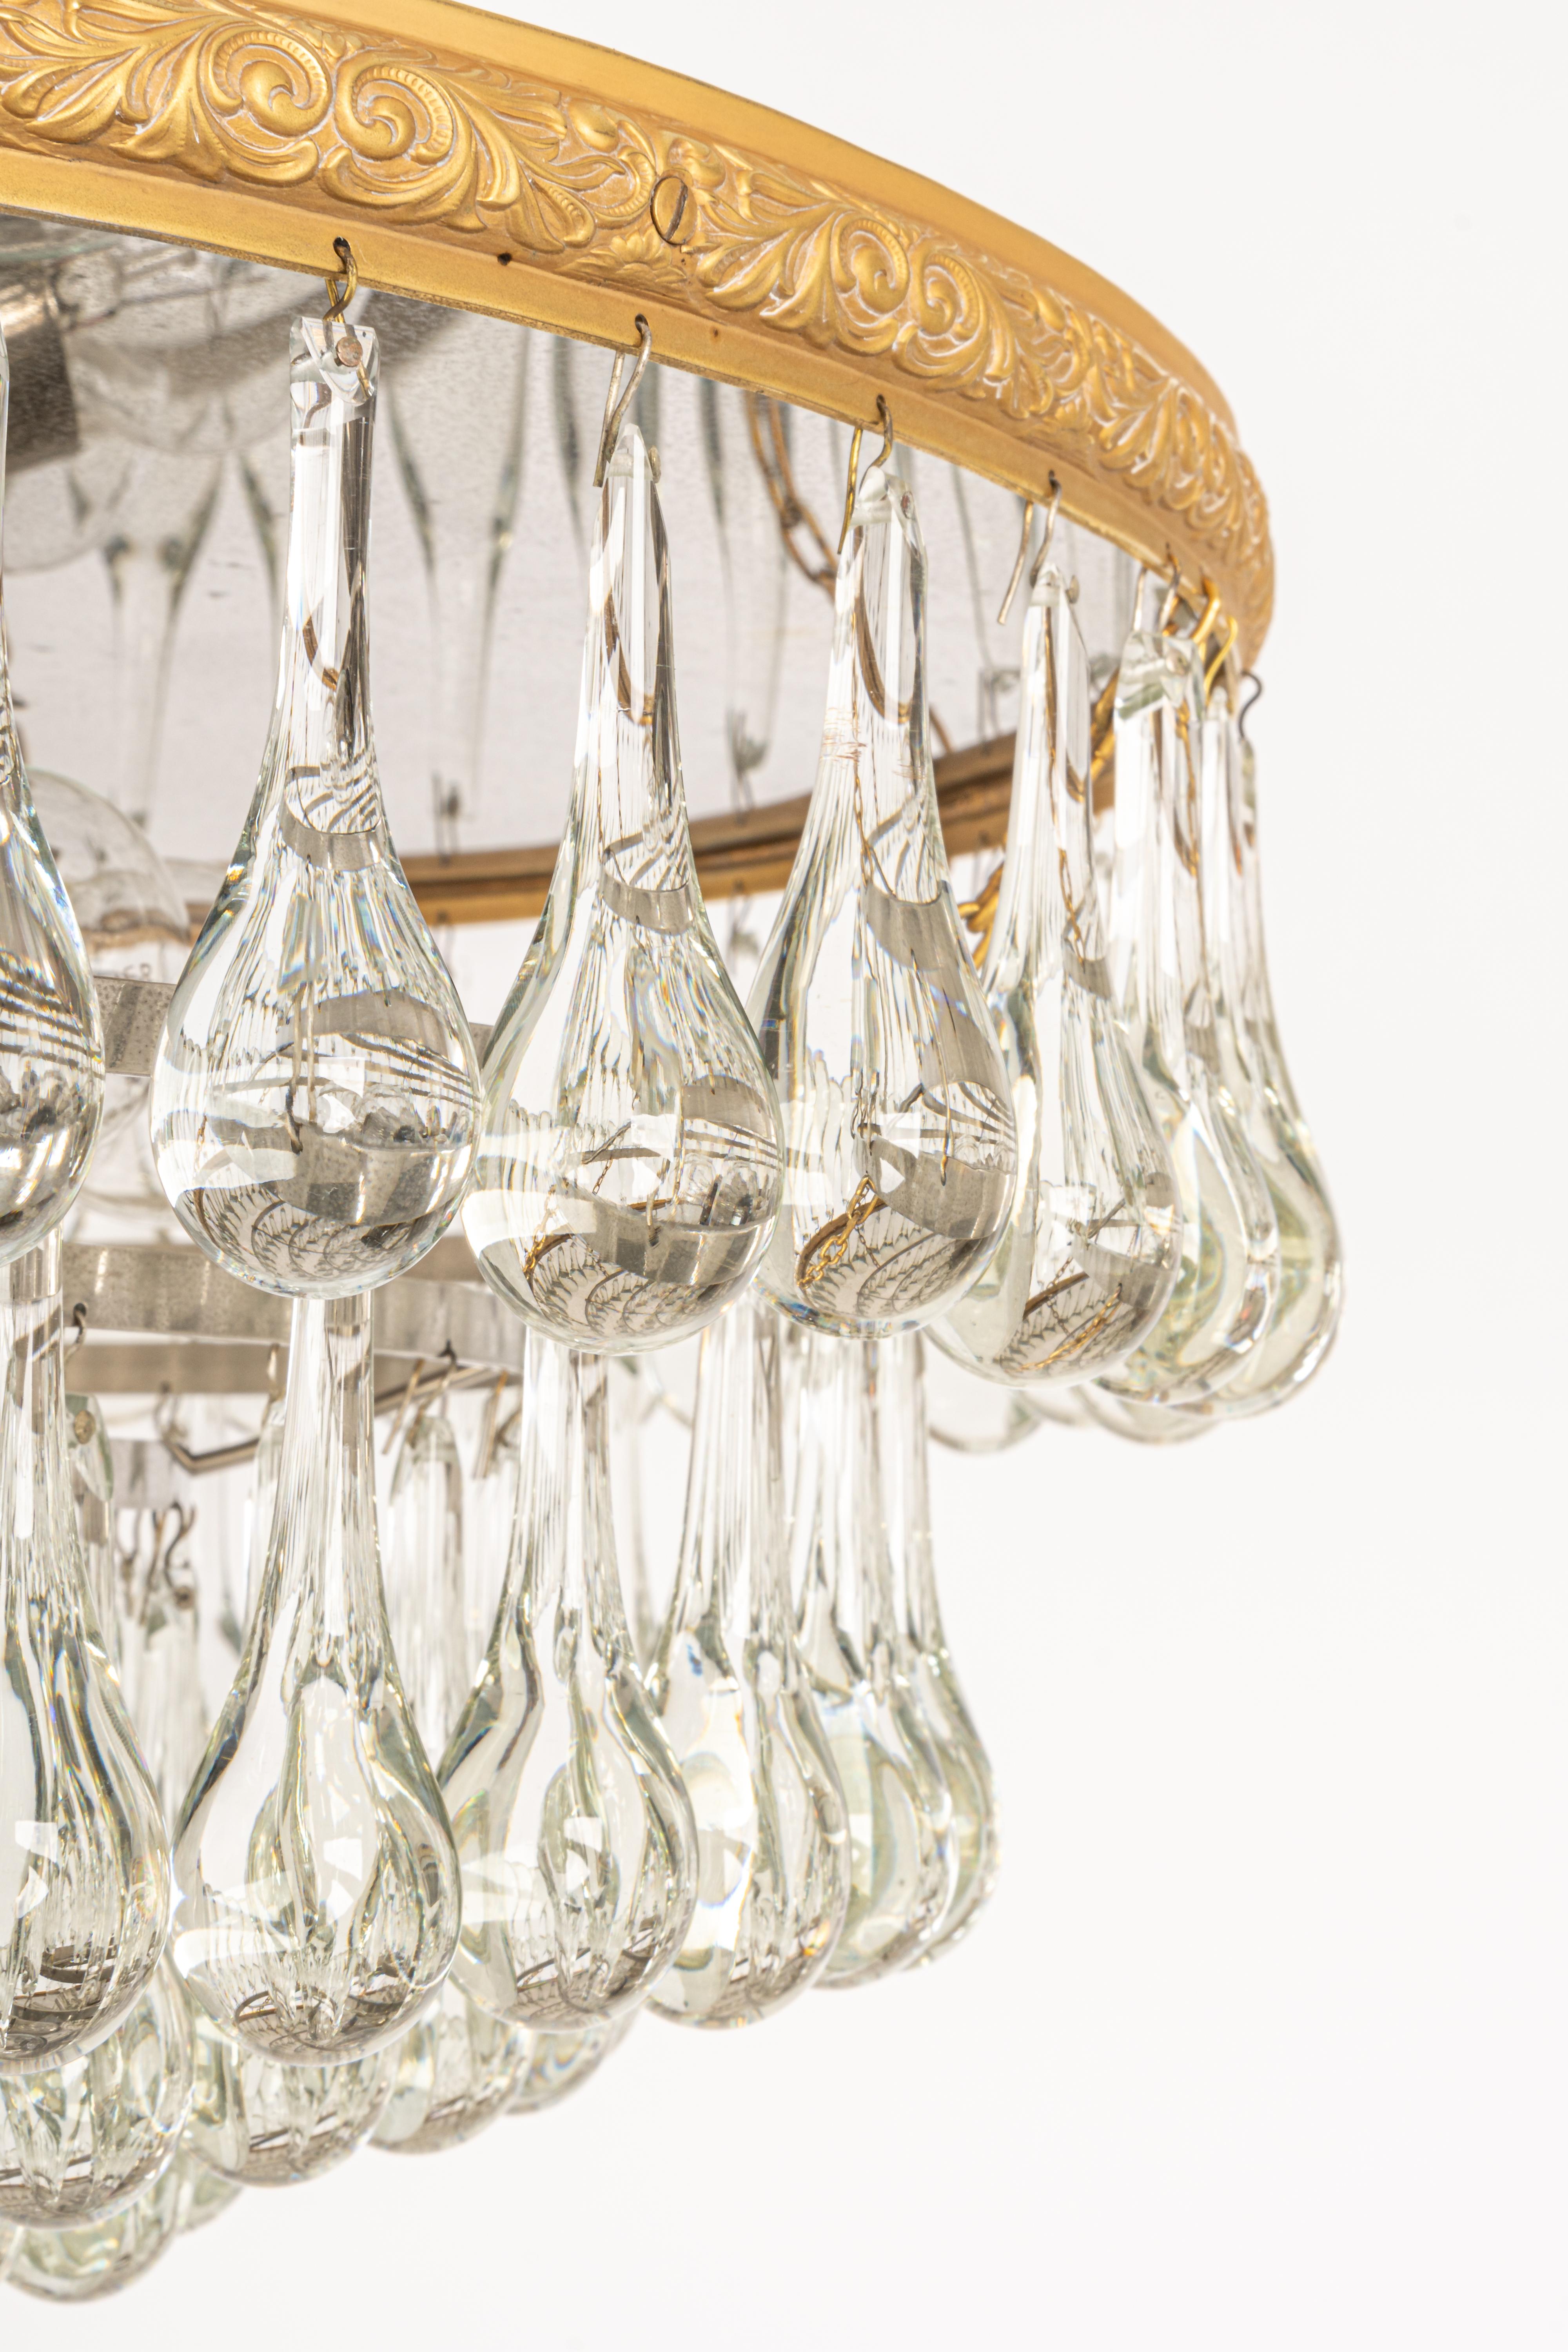 Large Murano Glass Tear Drop Chandelier by C.Palme, Germany, 1970s For Sale 6